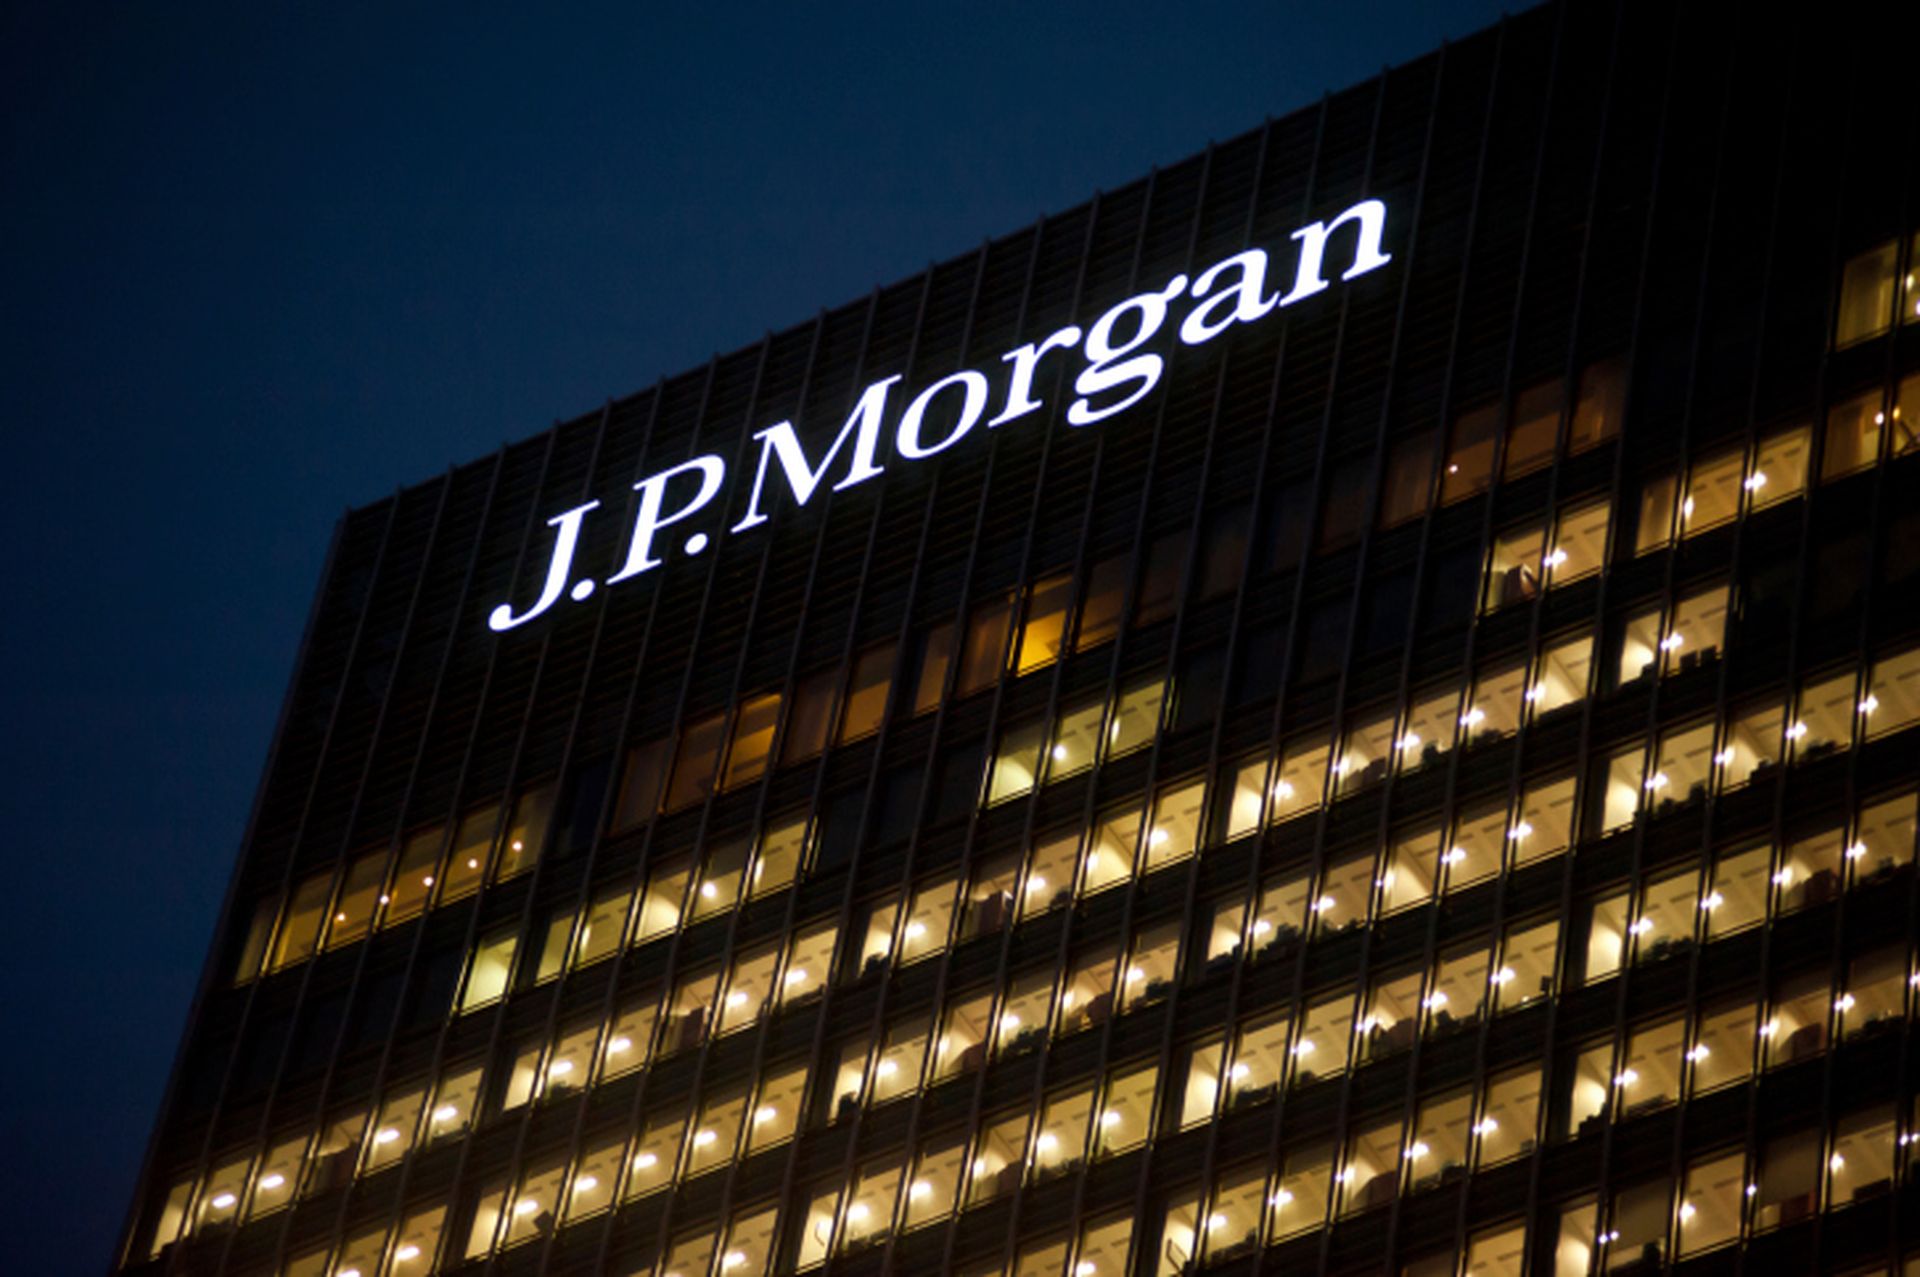 JPMorgan Chase continues to struggle with its data breach.